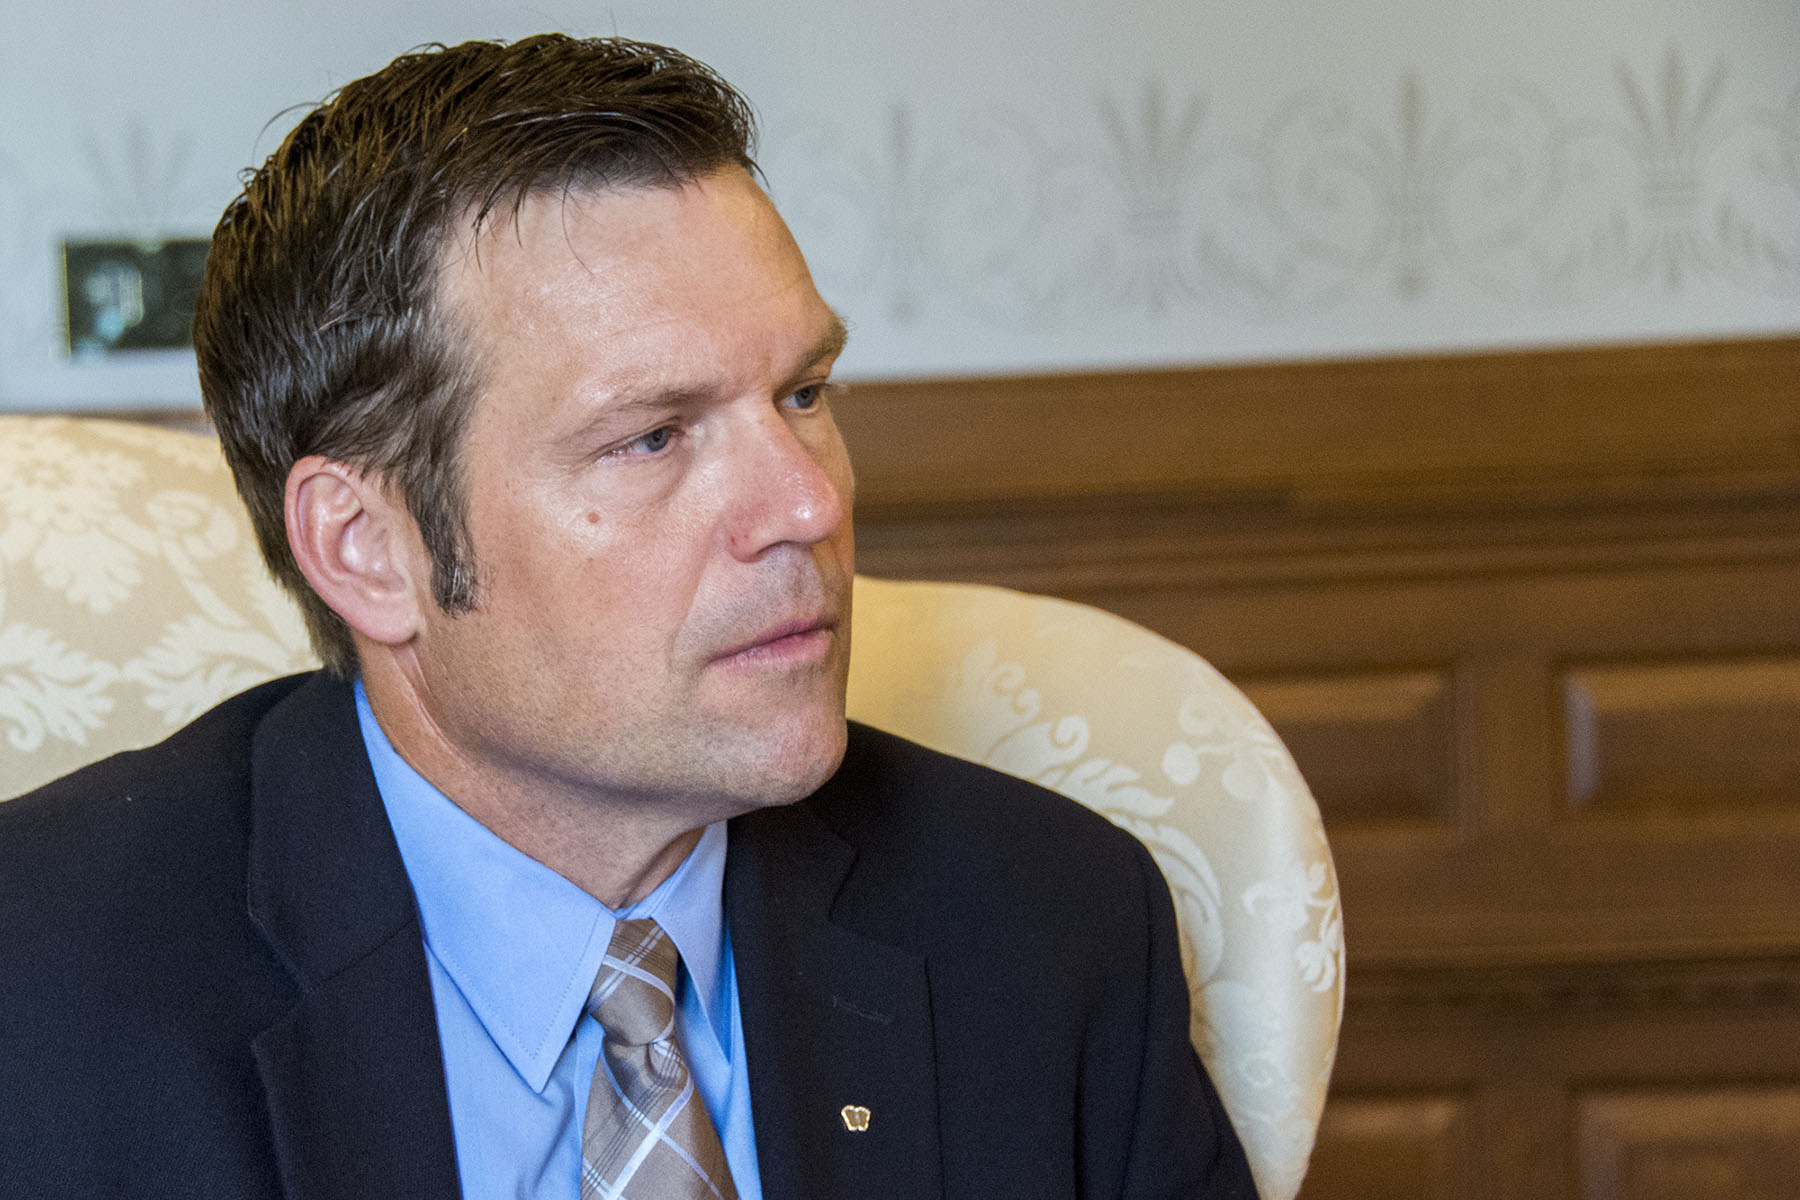 Kris Kobach, the Republican secretary of state of Kansas, championed the 2012 Secure and Fair Elections Act. The act requires individuals to provide photo identification and documentary proof of citizenship when registering to vote. (Photo by Andrew Clark, audio by Sarah Pitts/News21)